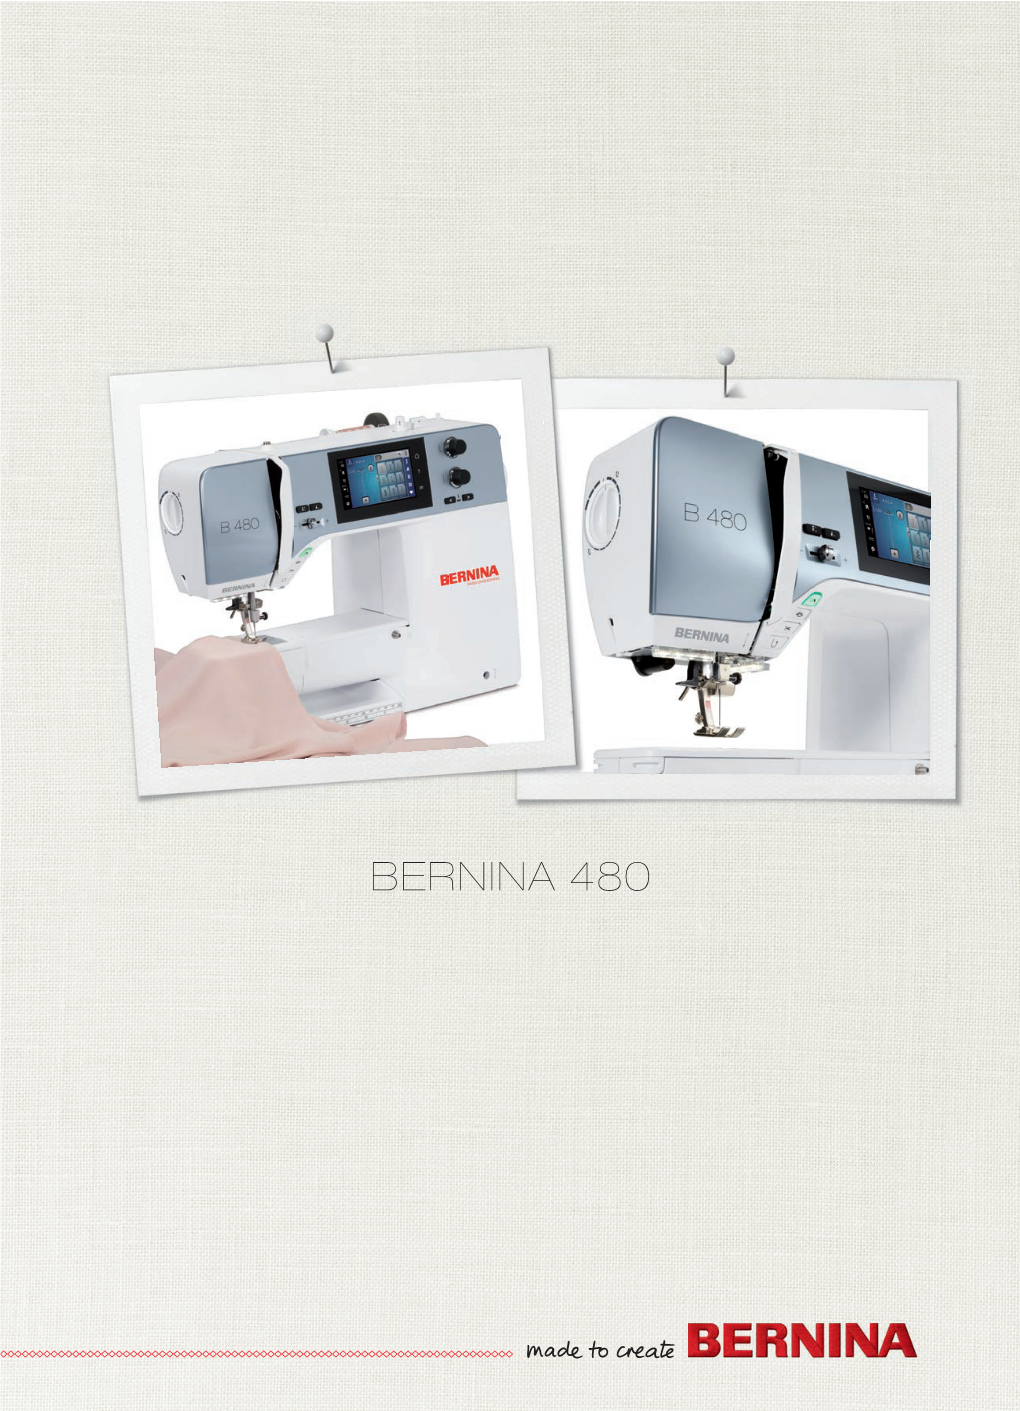 BERNINA 480 LOOKING for a NEW SEWING PROJECT? You Can Find What You Want in “Inspiration”, Our Sewing Magazine